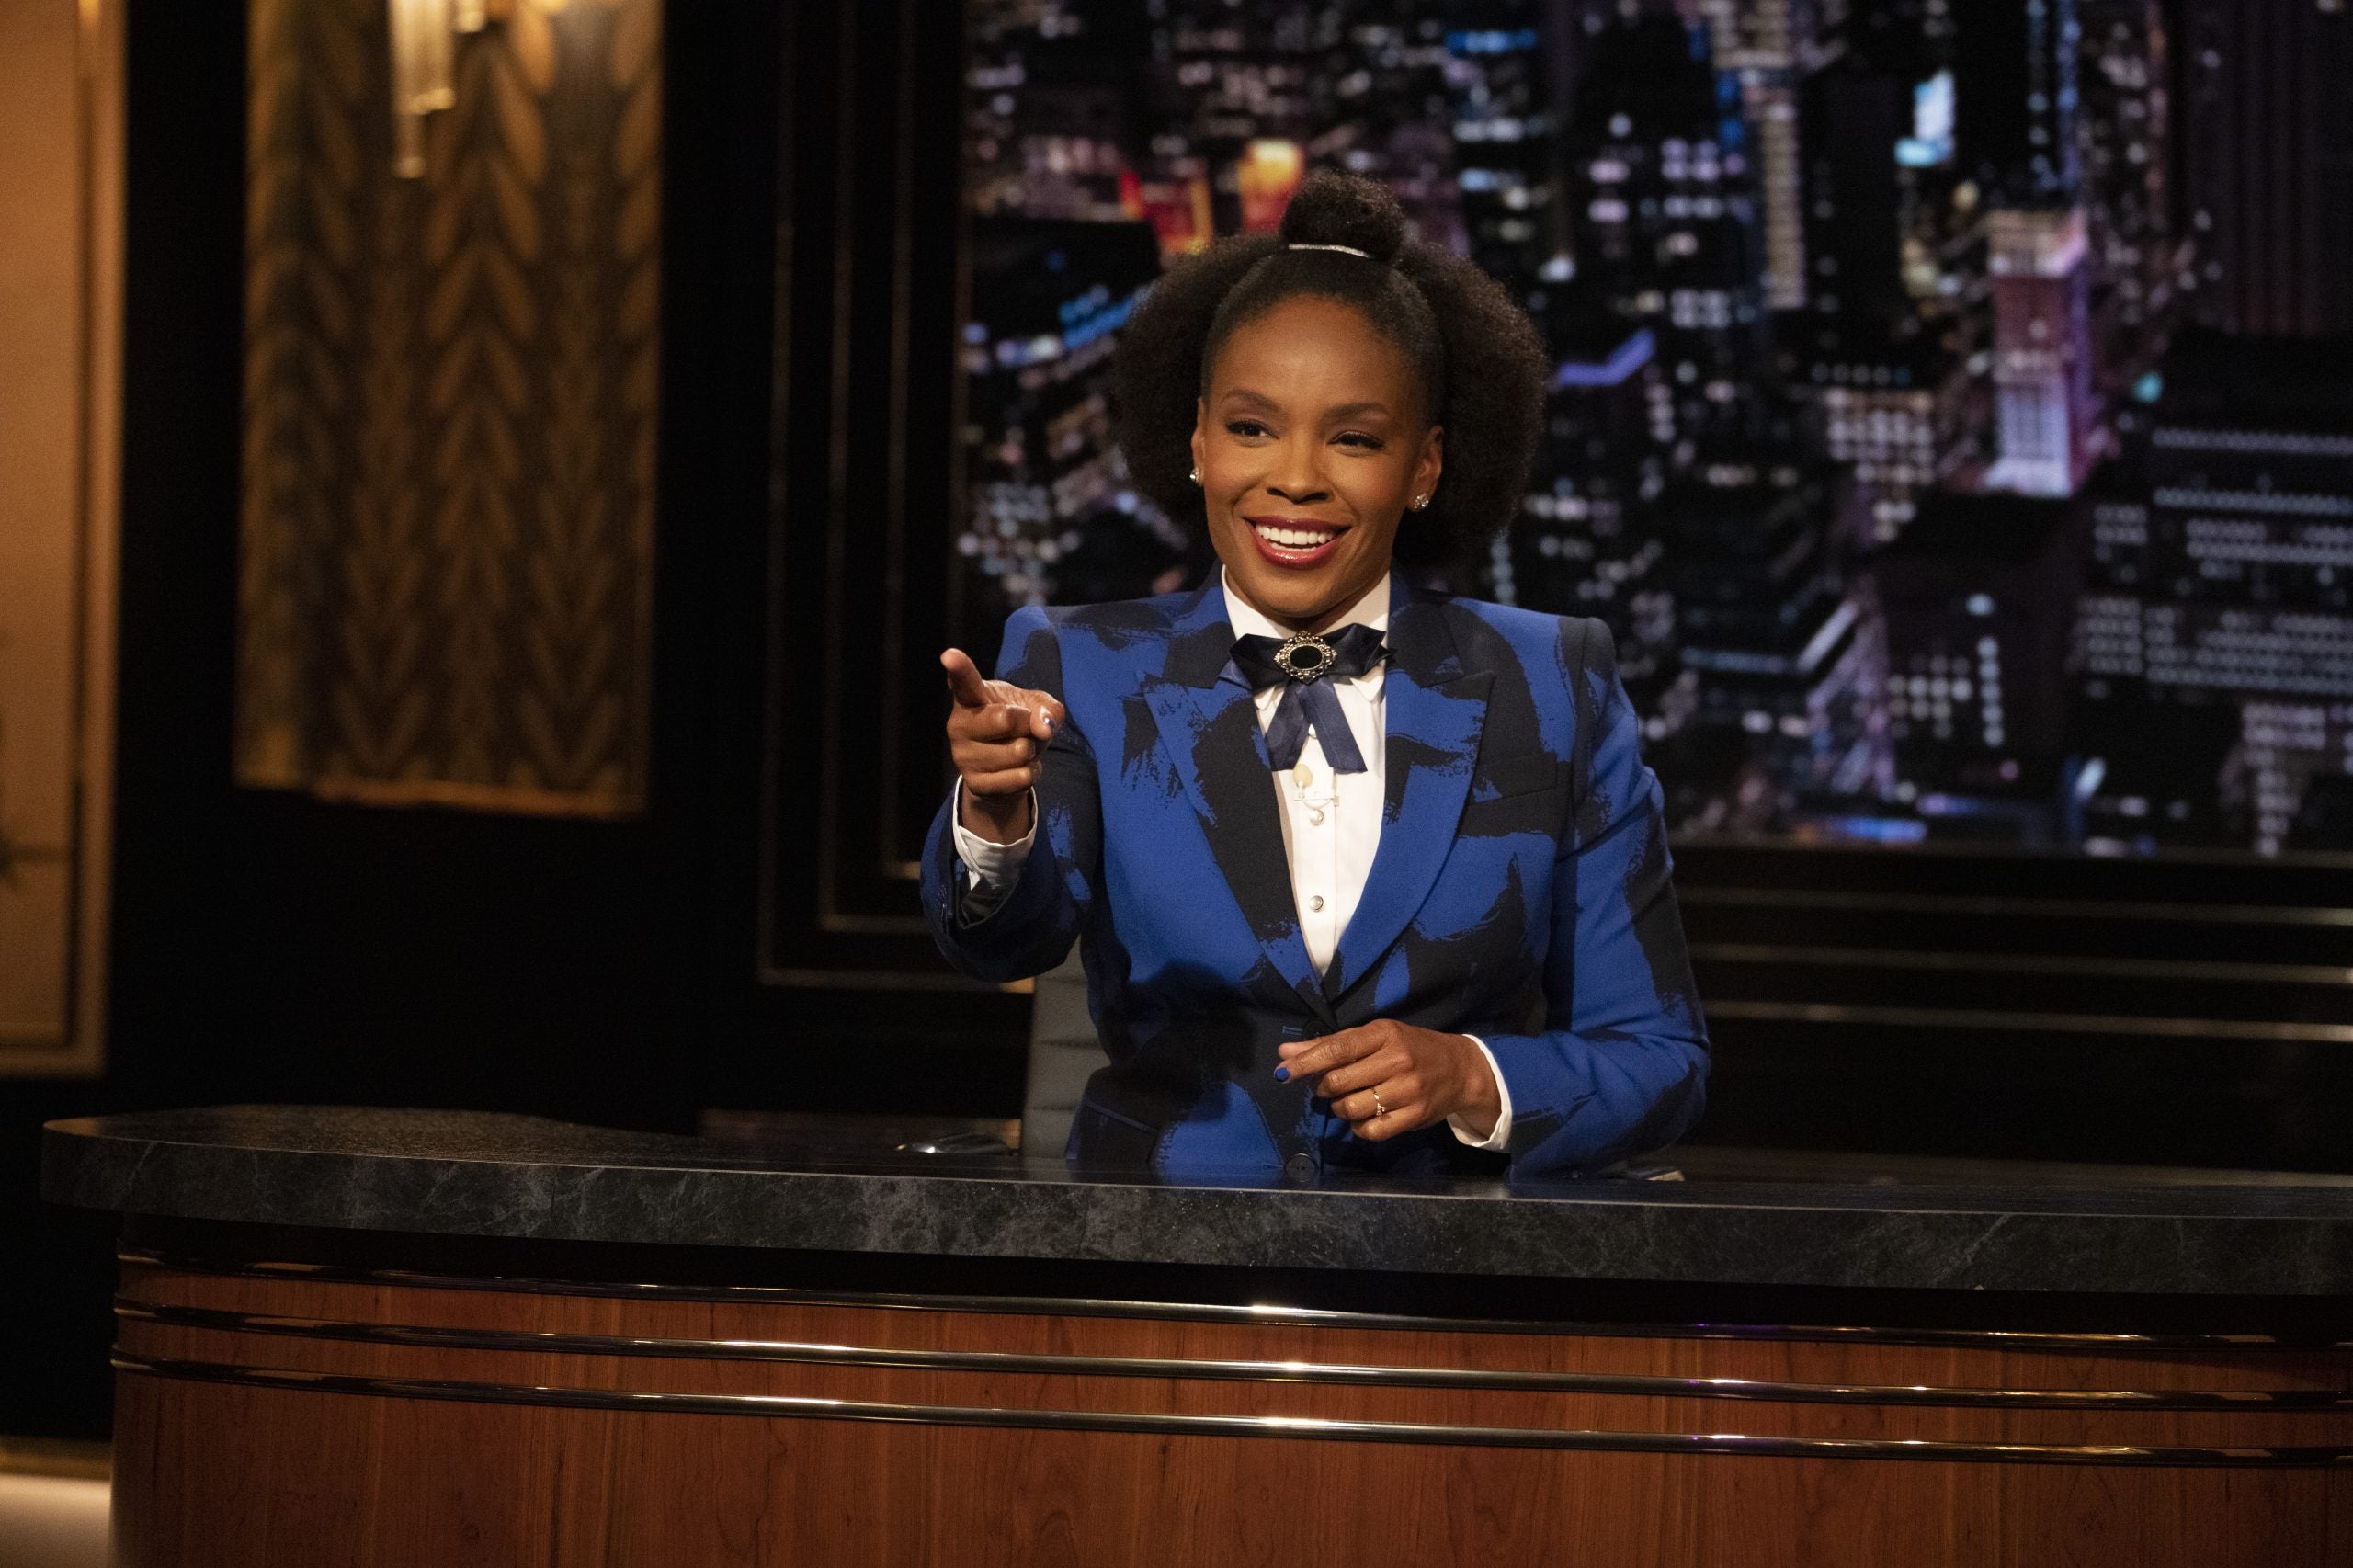 Amber Ruffin Is Dismantling Racism With A Smile On Her Face